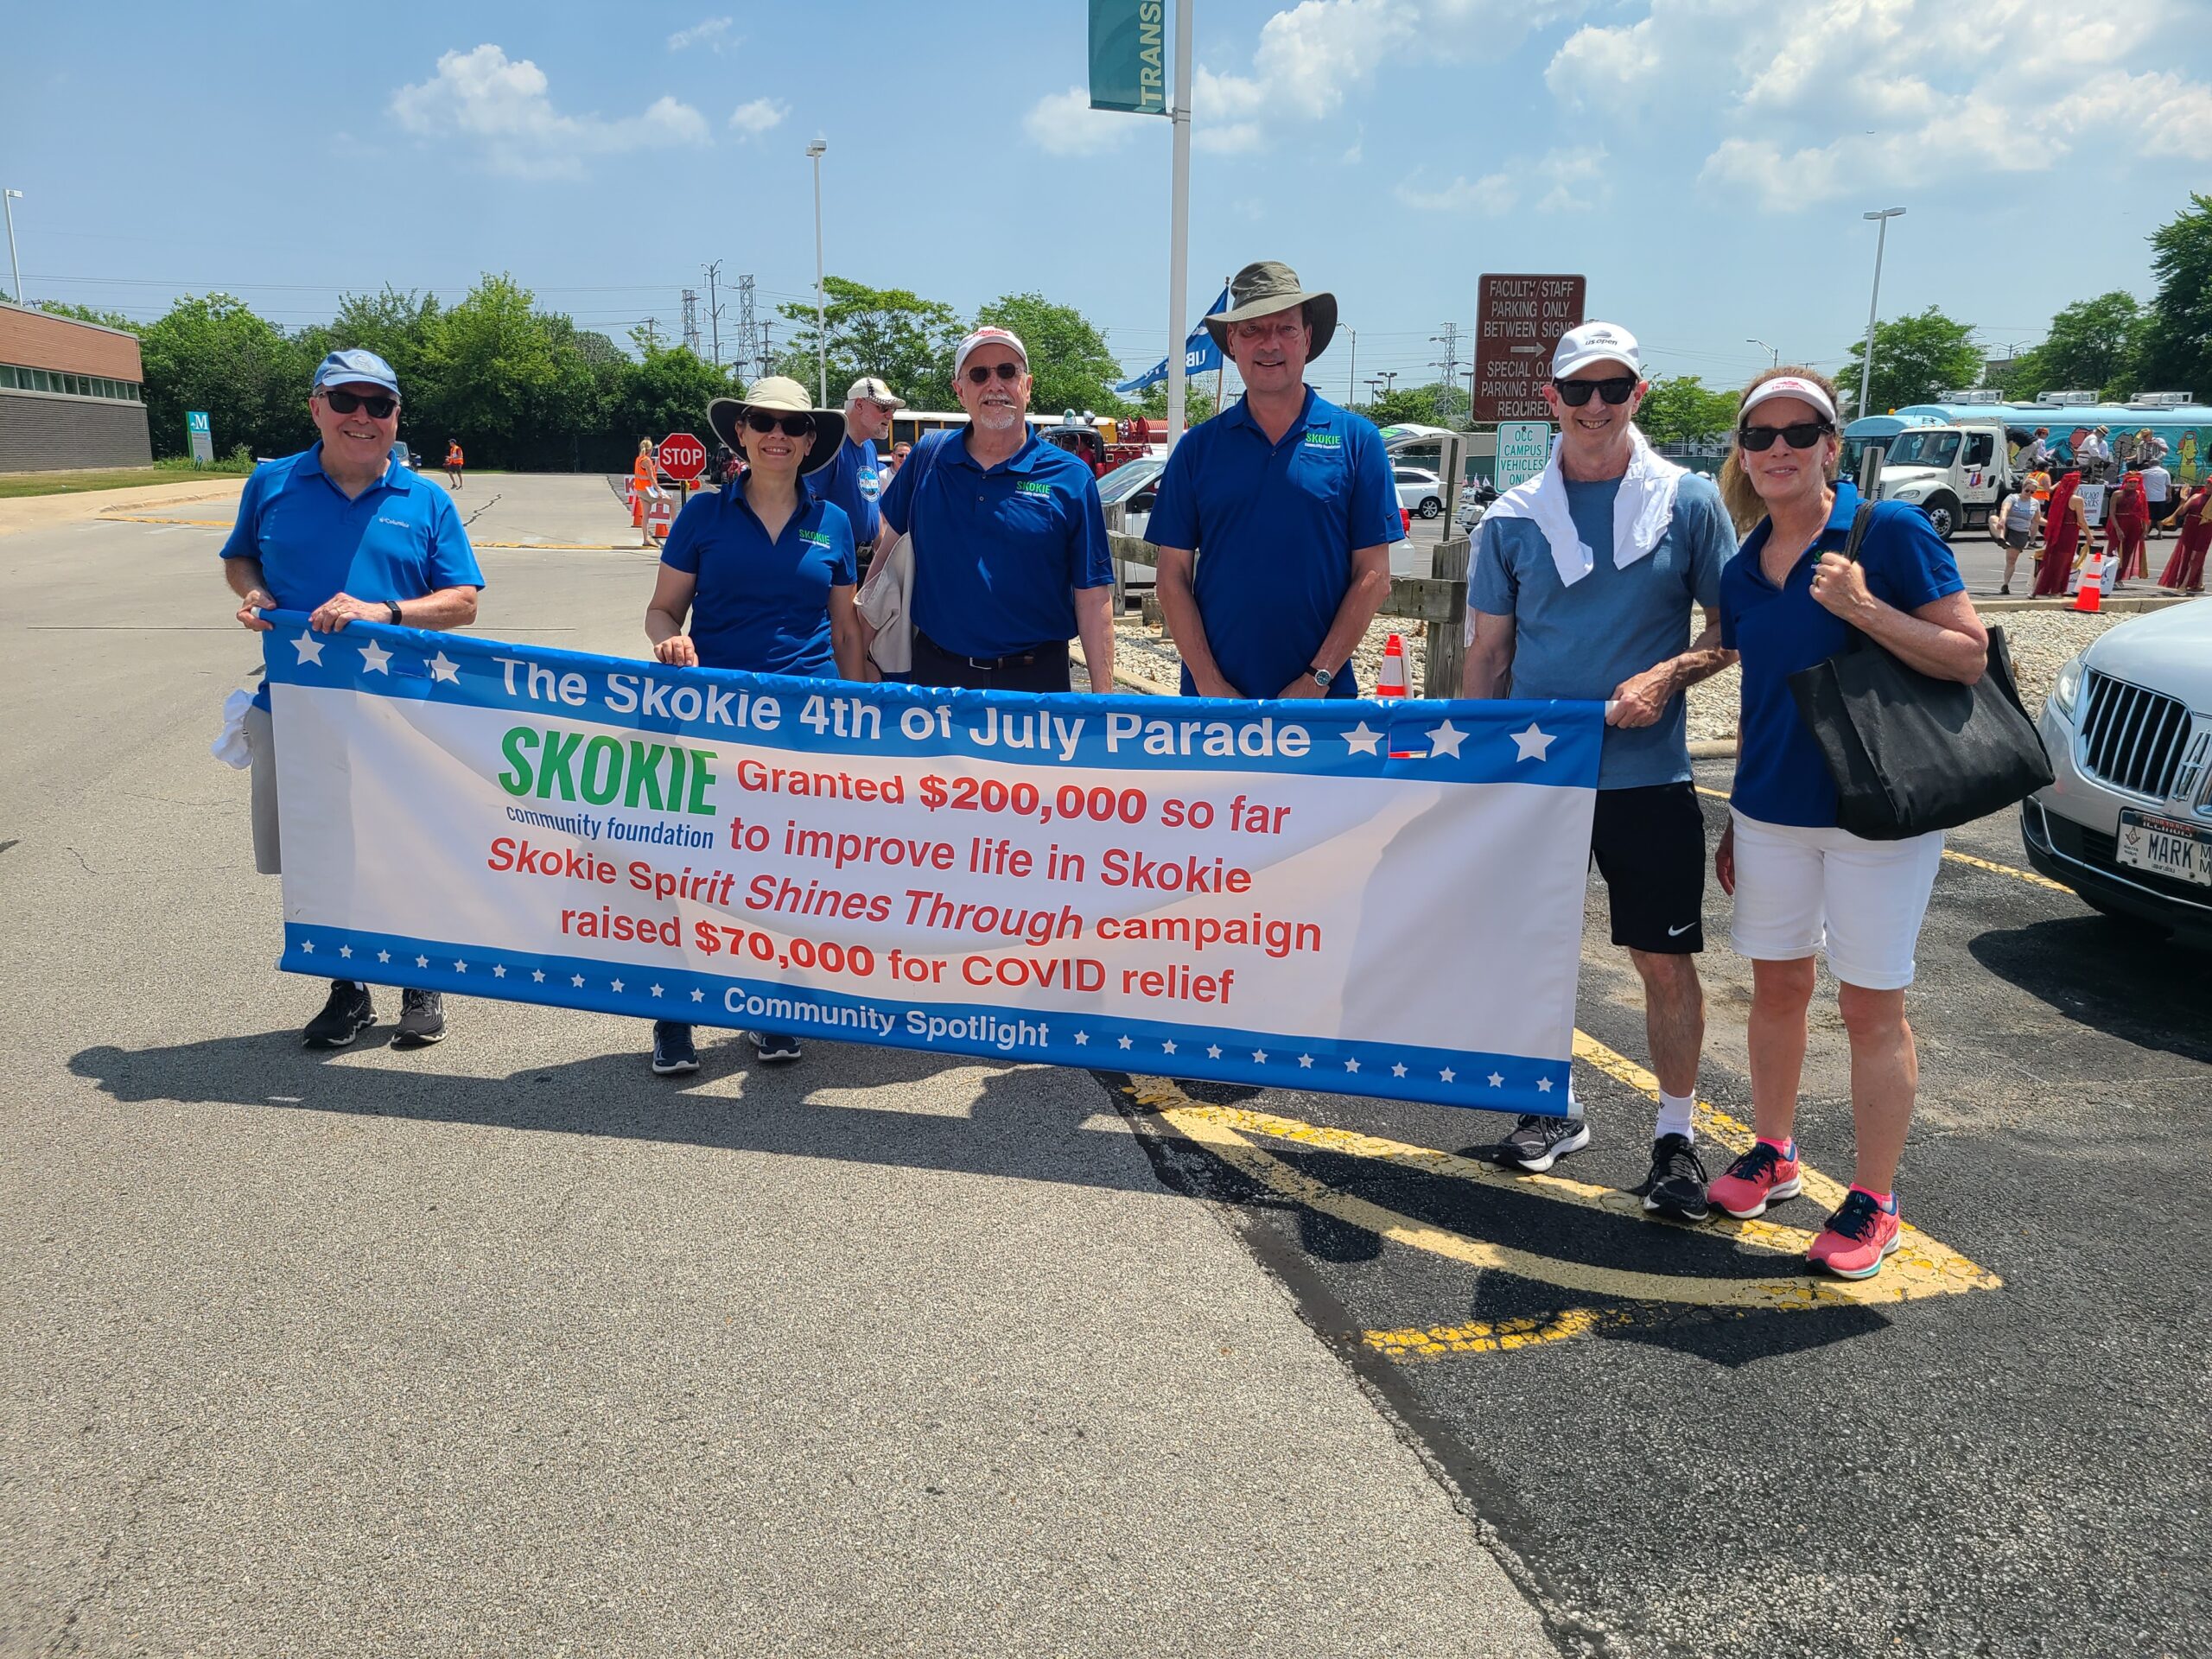 Skokie Community Foundation Board Members and supporters march behind the Skokie 4th of July "Community Spotlight" banner.